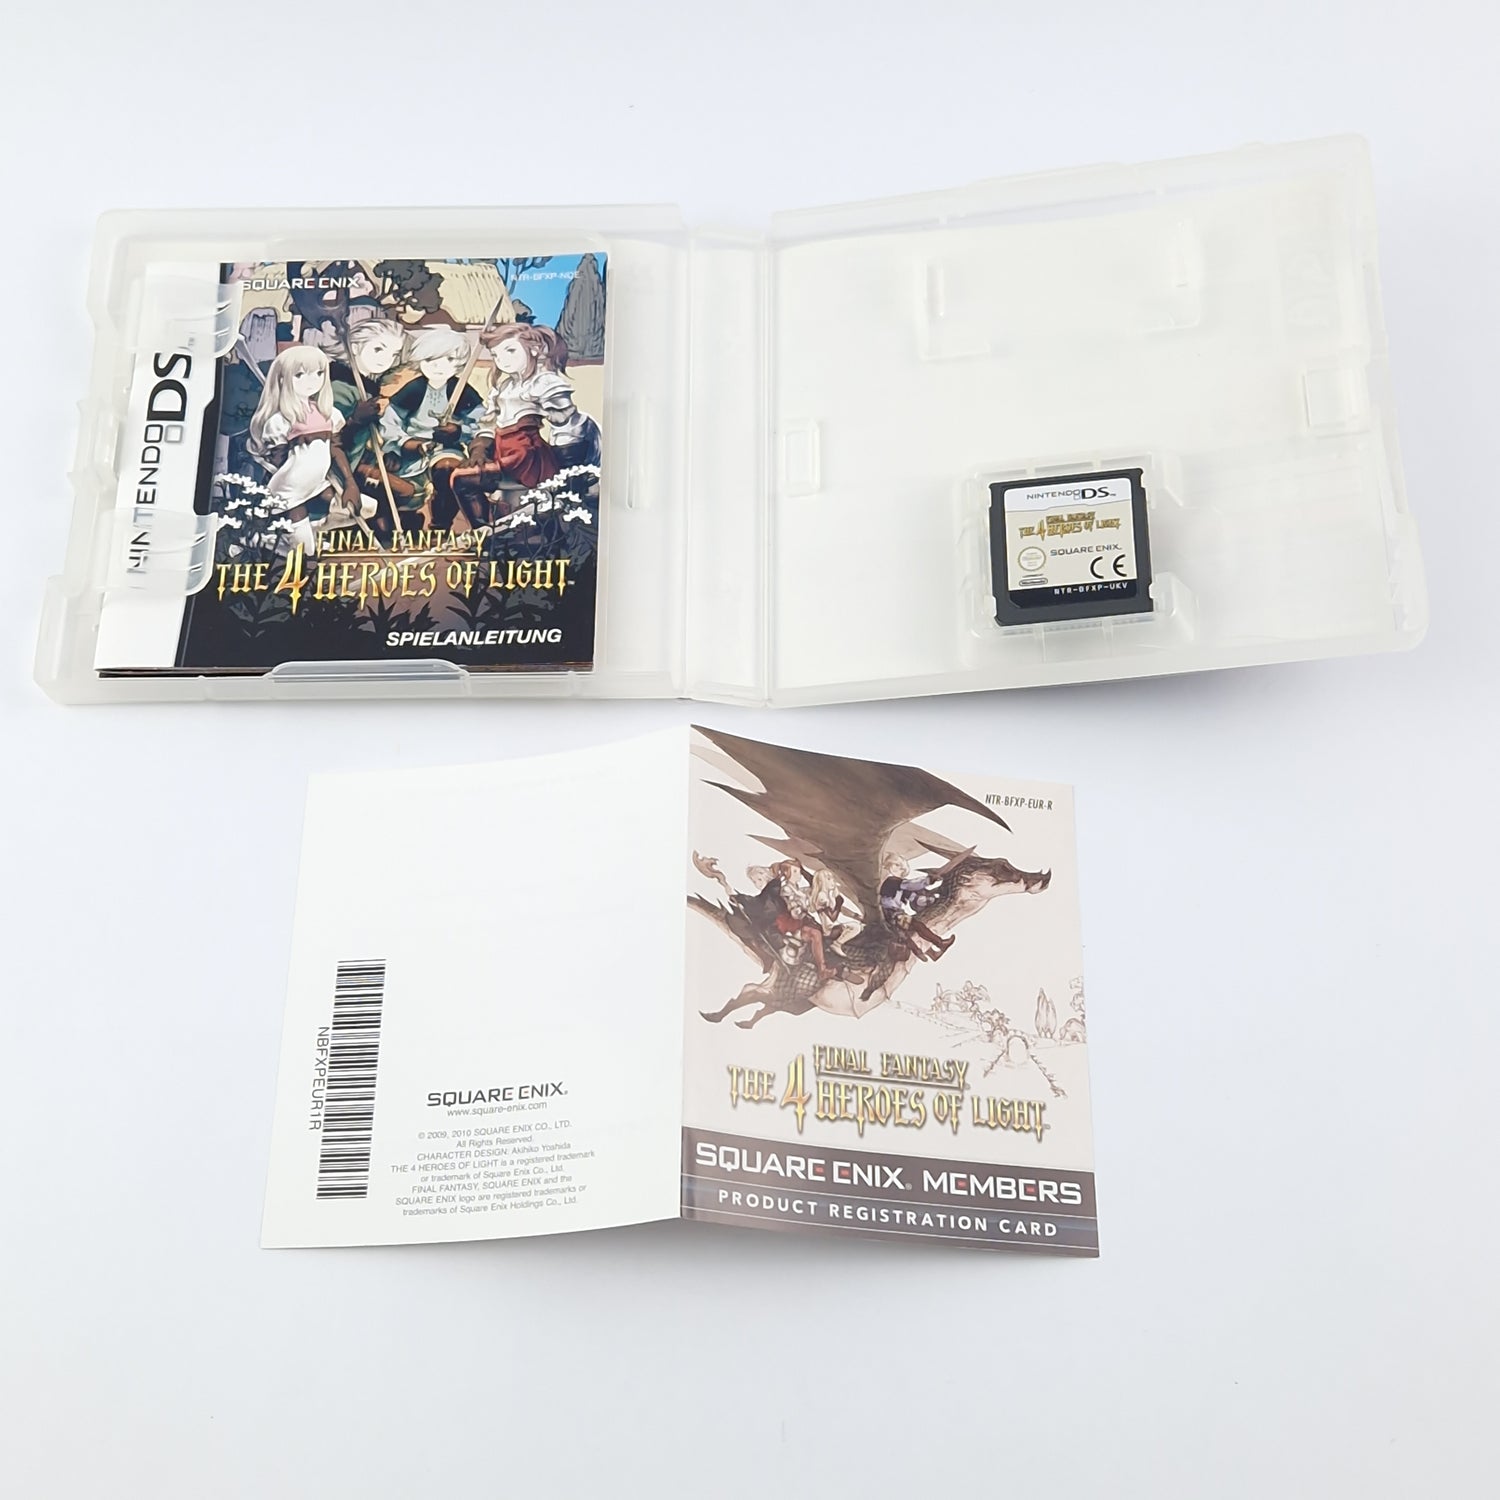 Nintendo DS Spiel : Final Fantasy The 4 Heroes of Light + Bradygames Guide